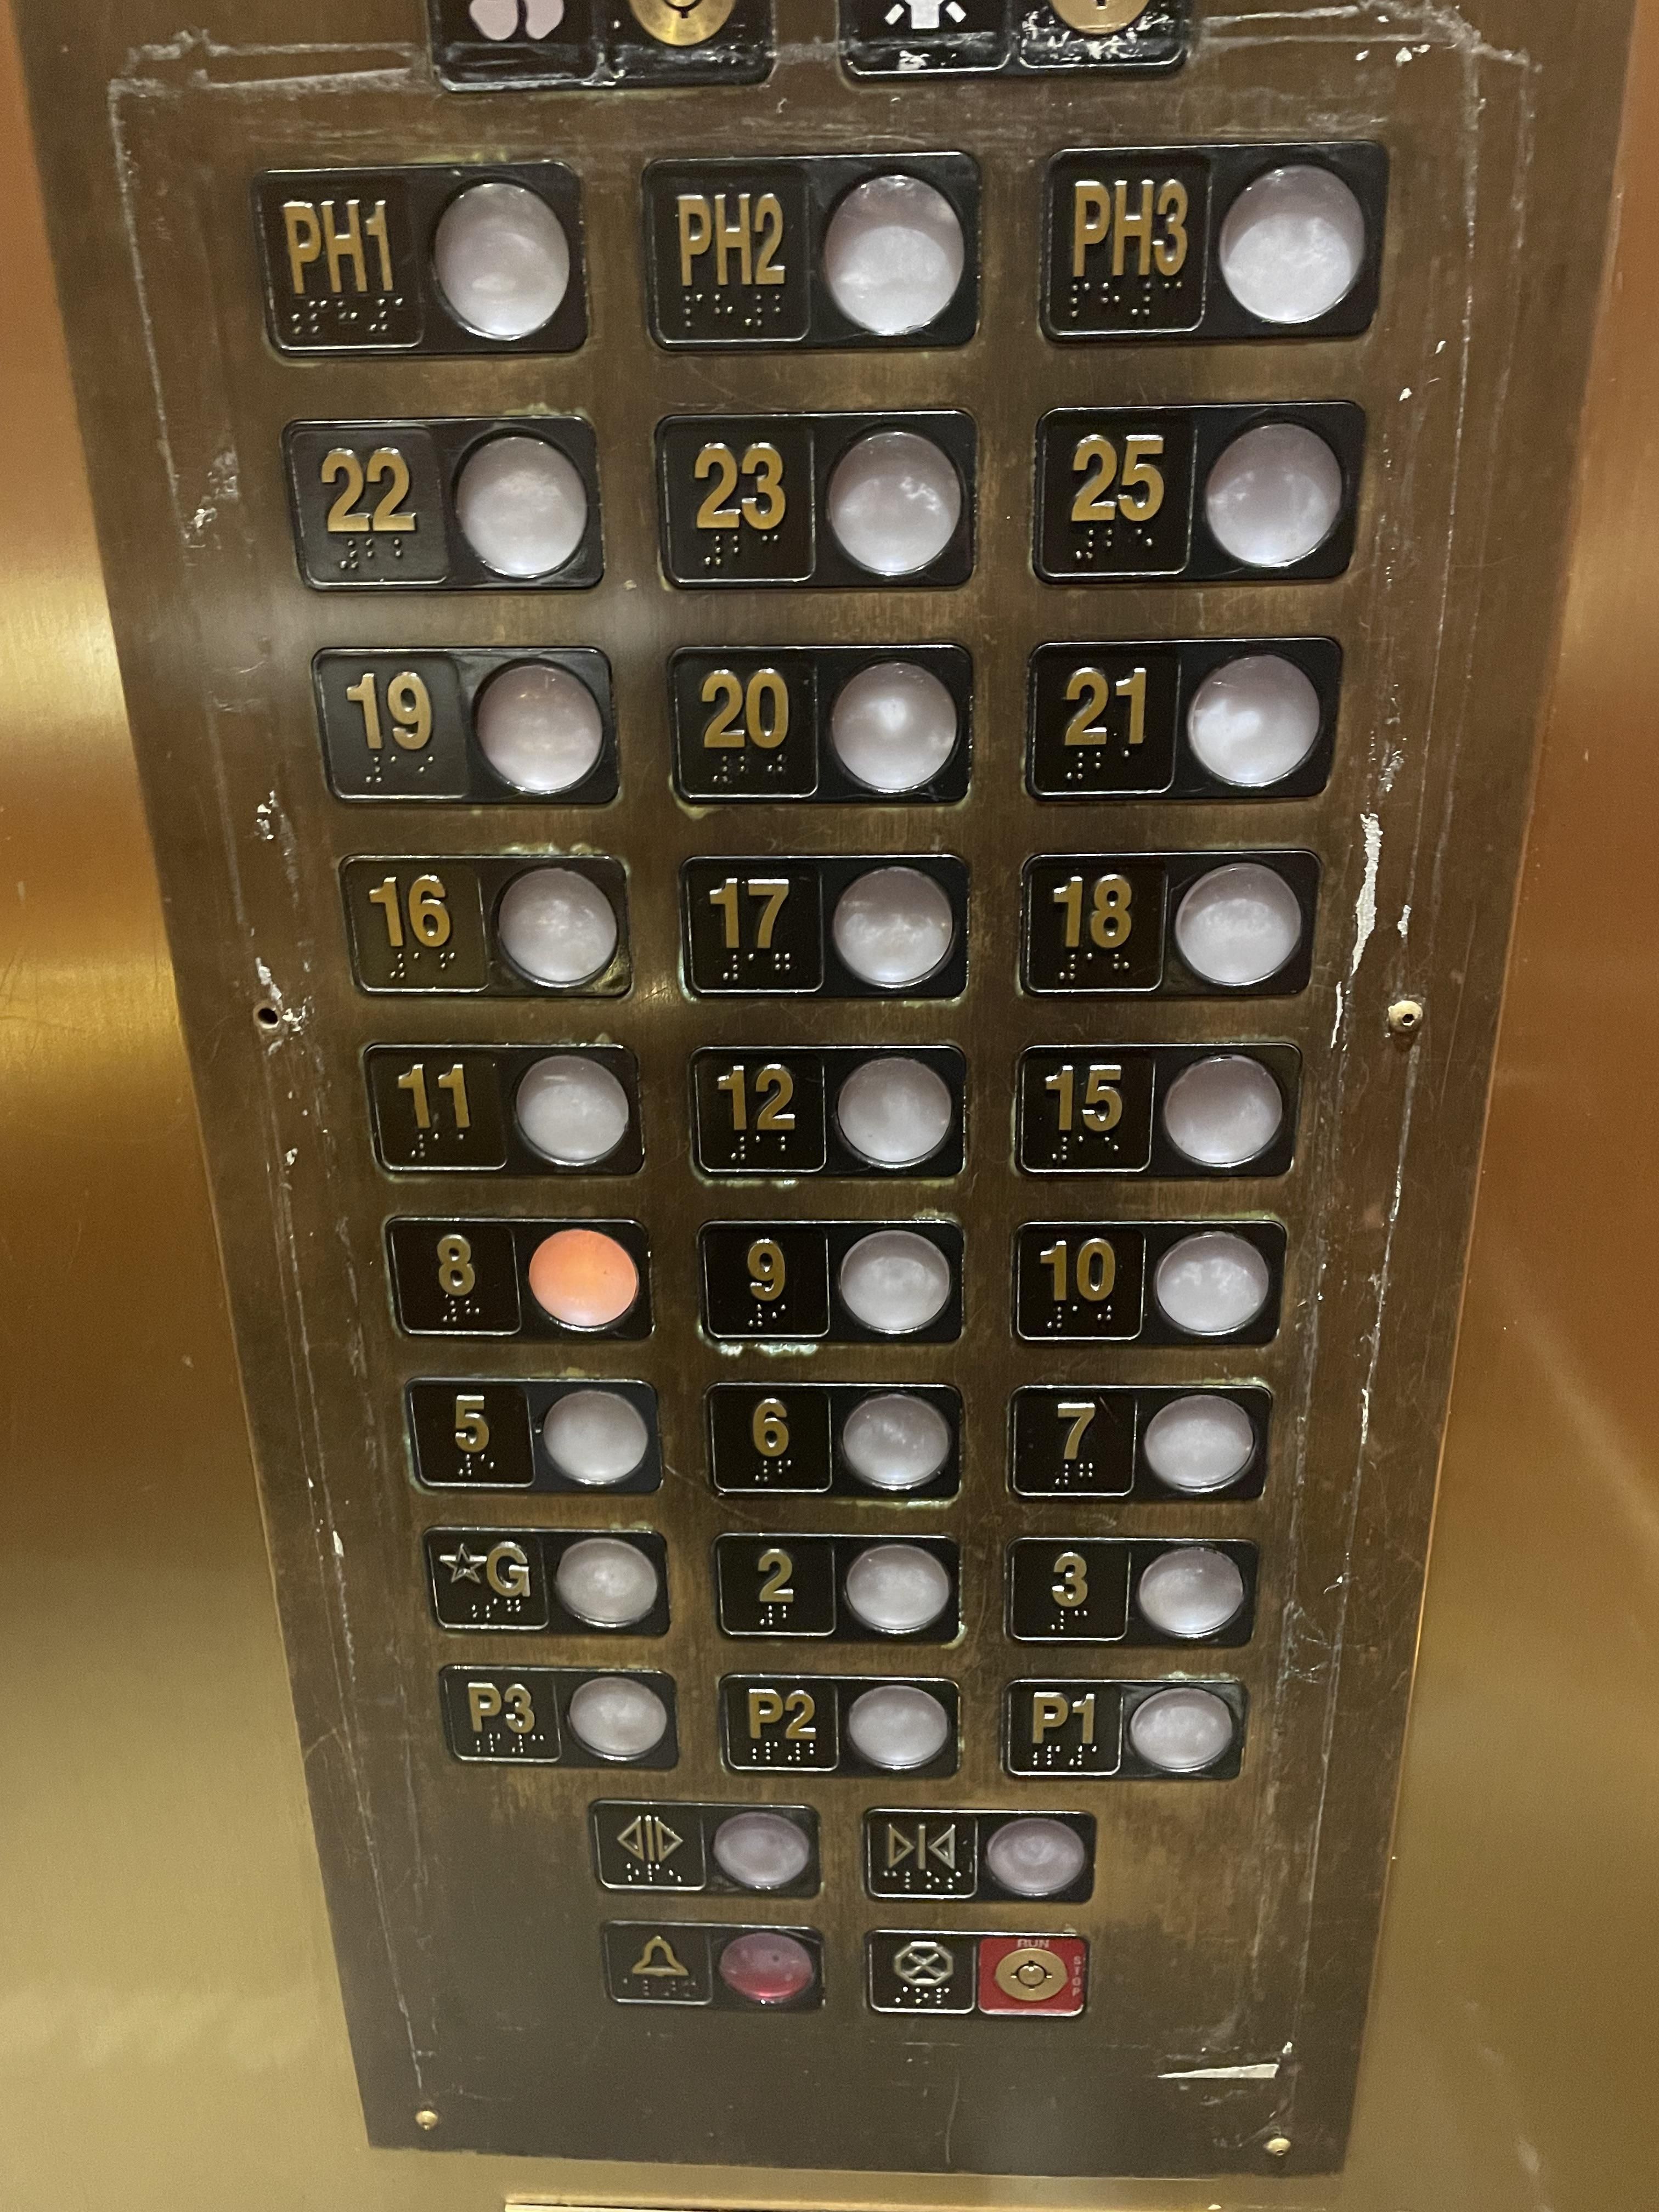 Either the person who made this elevator can’t count, or there are more unlucky numbers than I thought…